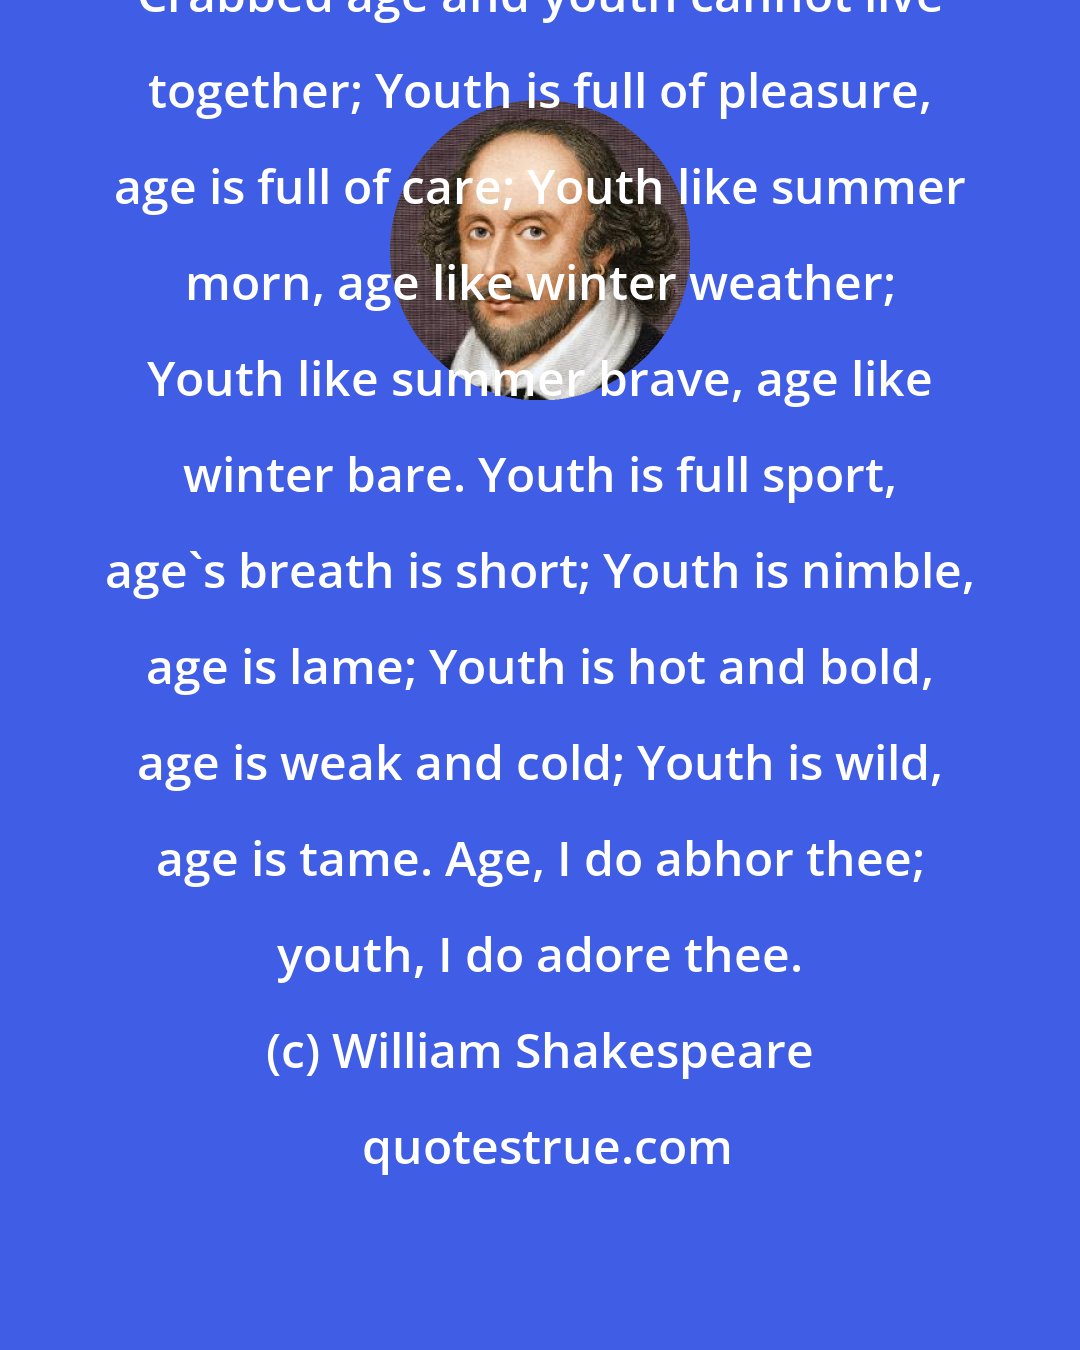 William Shakespeare: Crabbed age and youth cannot live together; Youth is full of pleasure, age is full of care; Youth like summer morn, age like winter weather; Youth like summer brave, age like winter bare. Youth is full sport, age's breath is short; Youth is nimble, age is lame; Youth is hot and bold, age is weak and cold; Youth is wild, age is tame. Age, I do abhor thee; youth, I do adore thee.